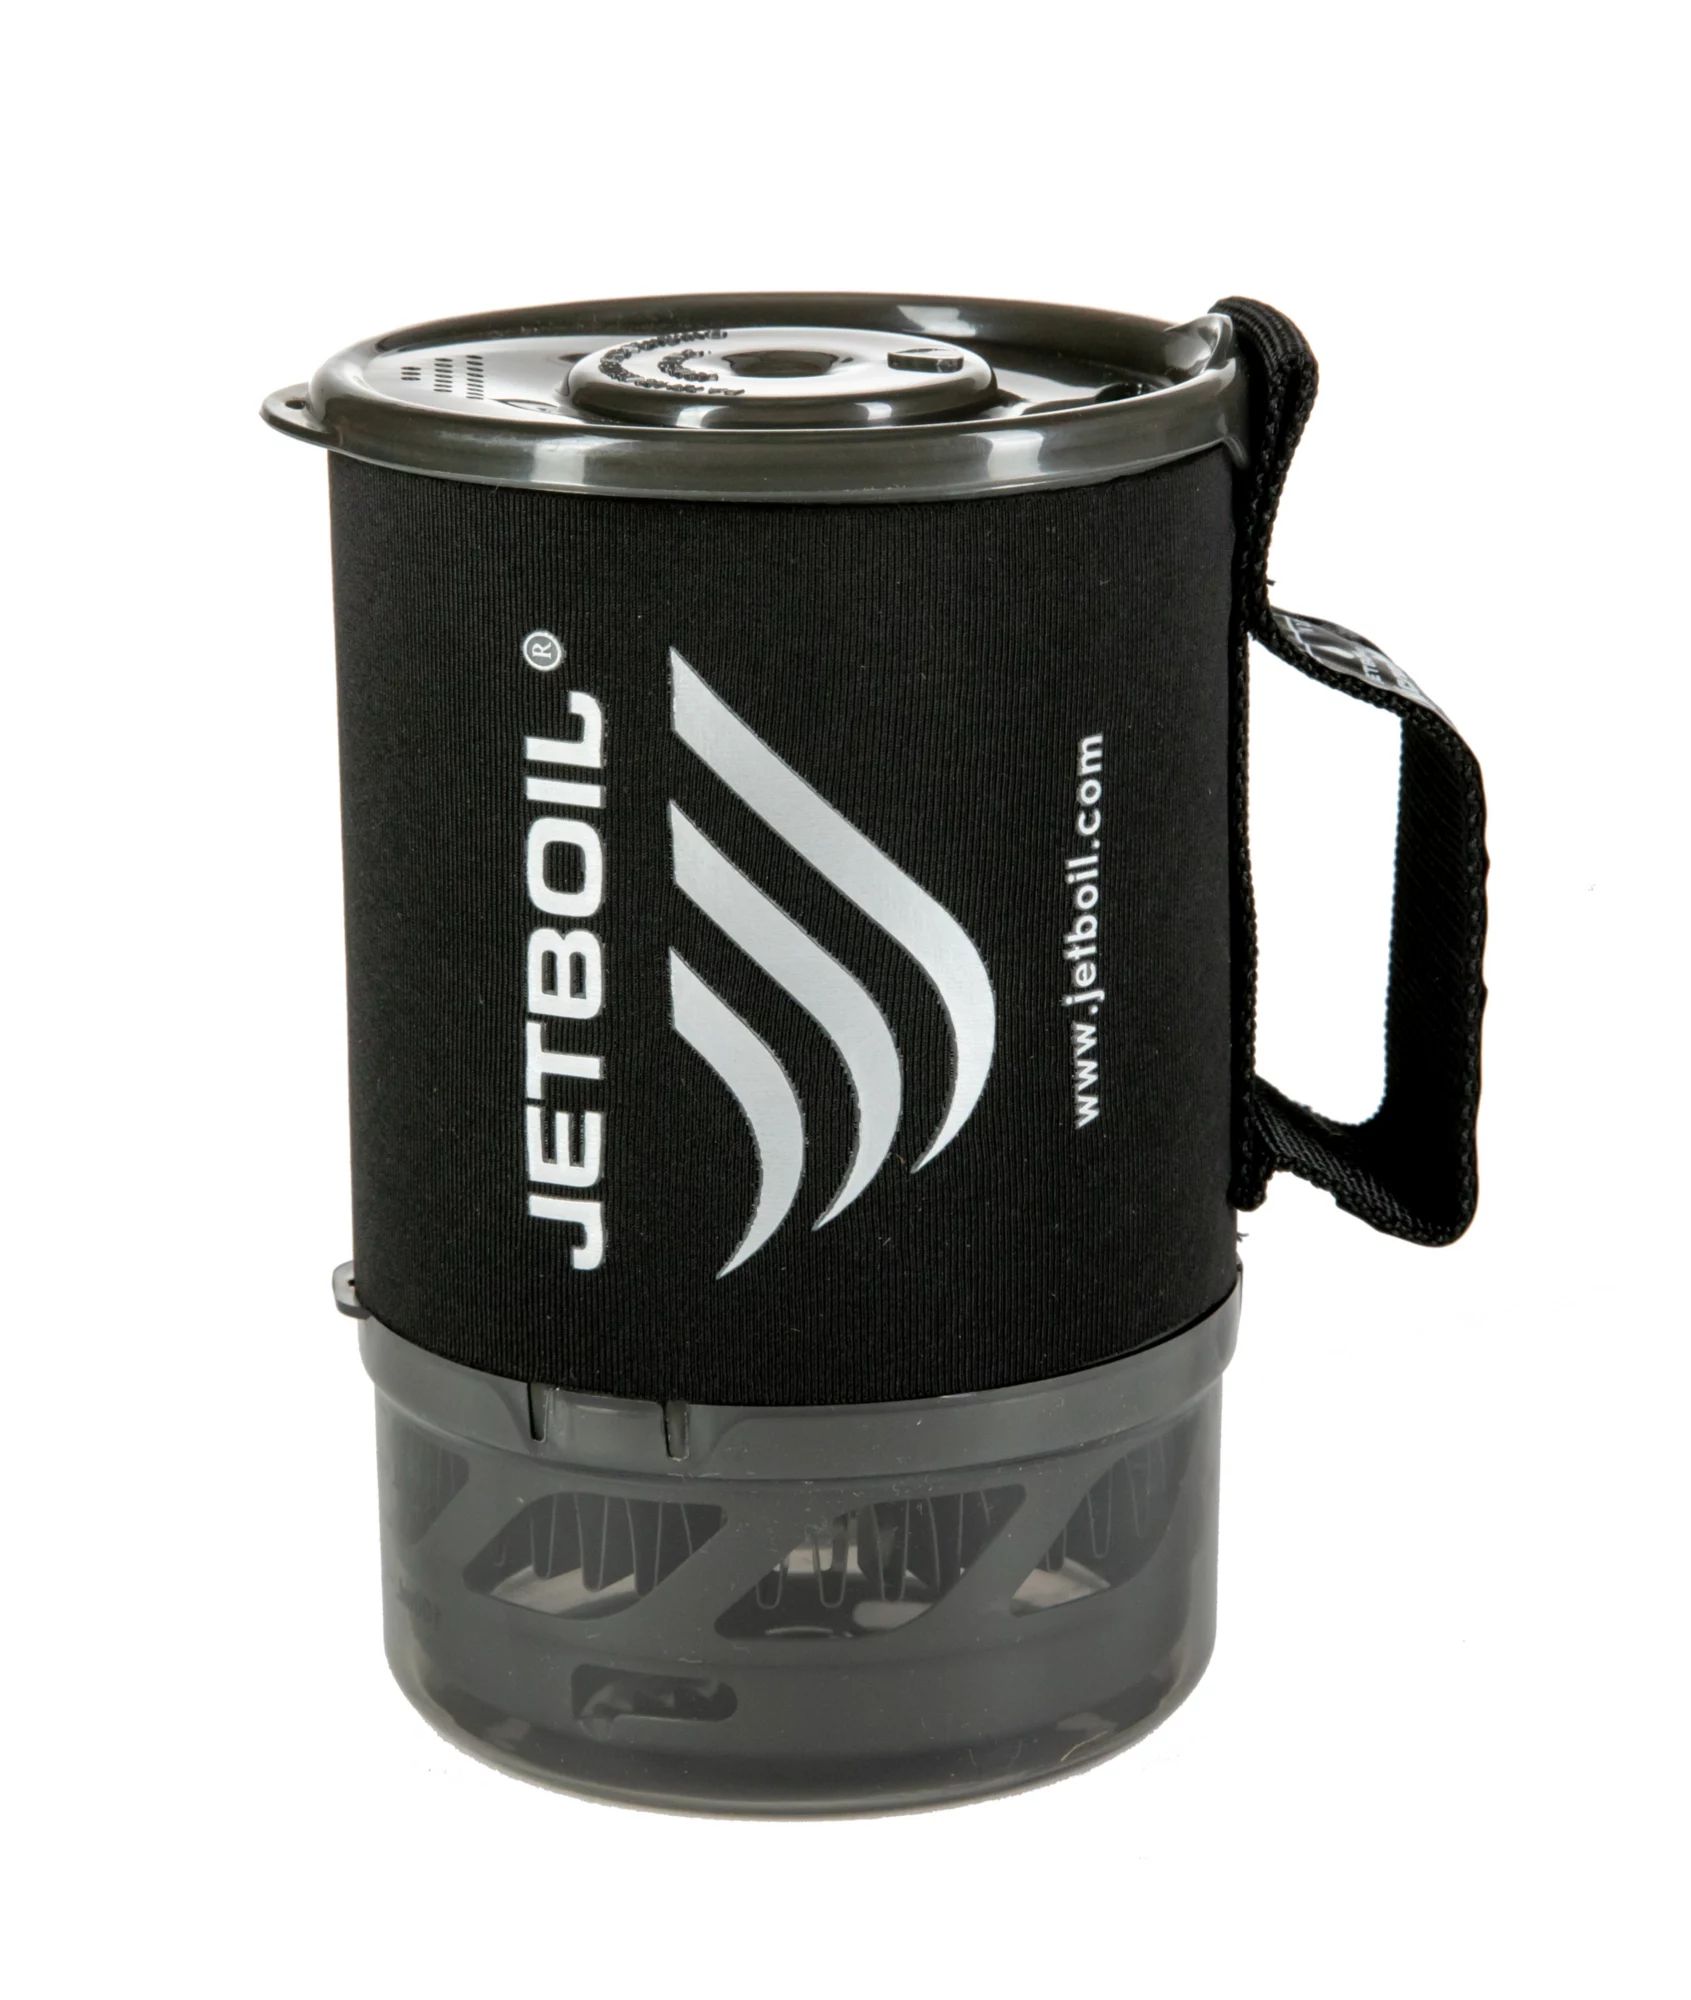 Jetboil MicroMo Cooking System, coffee | Dick's Sporting Goods